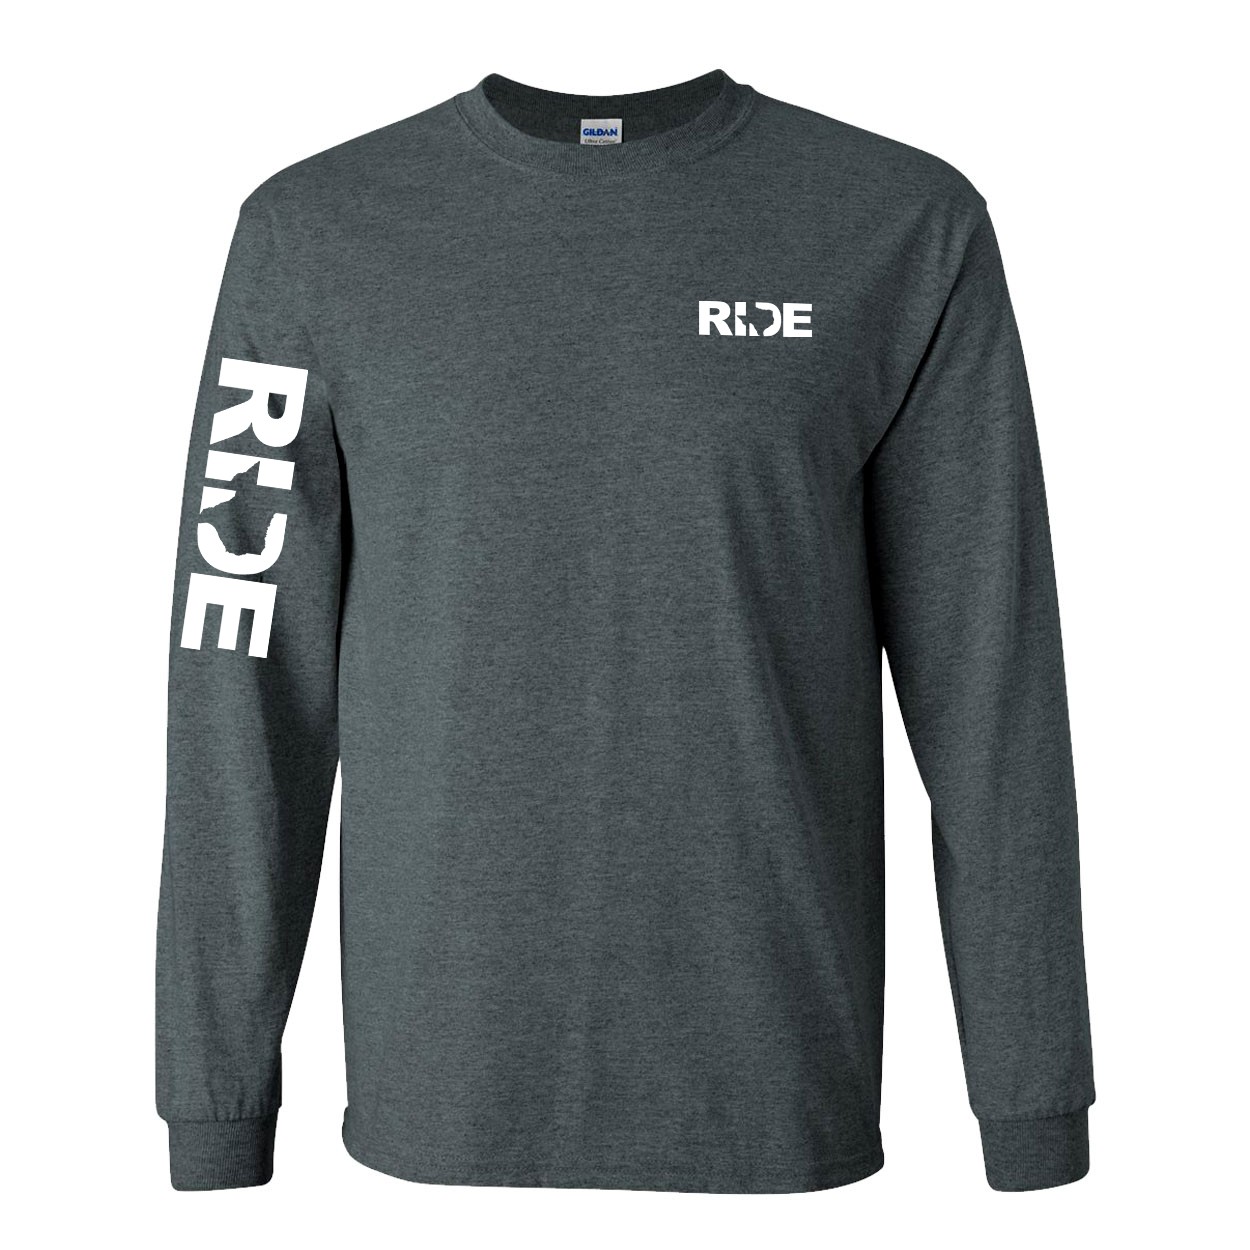 Ride Texas Night Out Long Sleeve T-Shirt with Arm Logo Dark Heather Gray (White Logo)